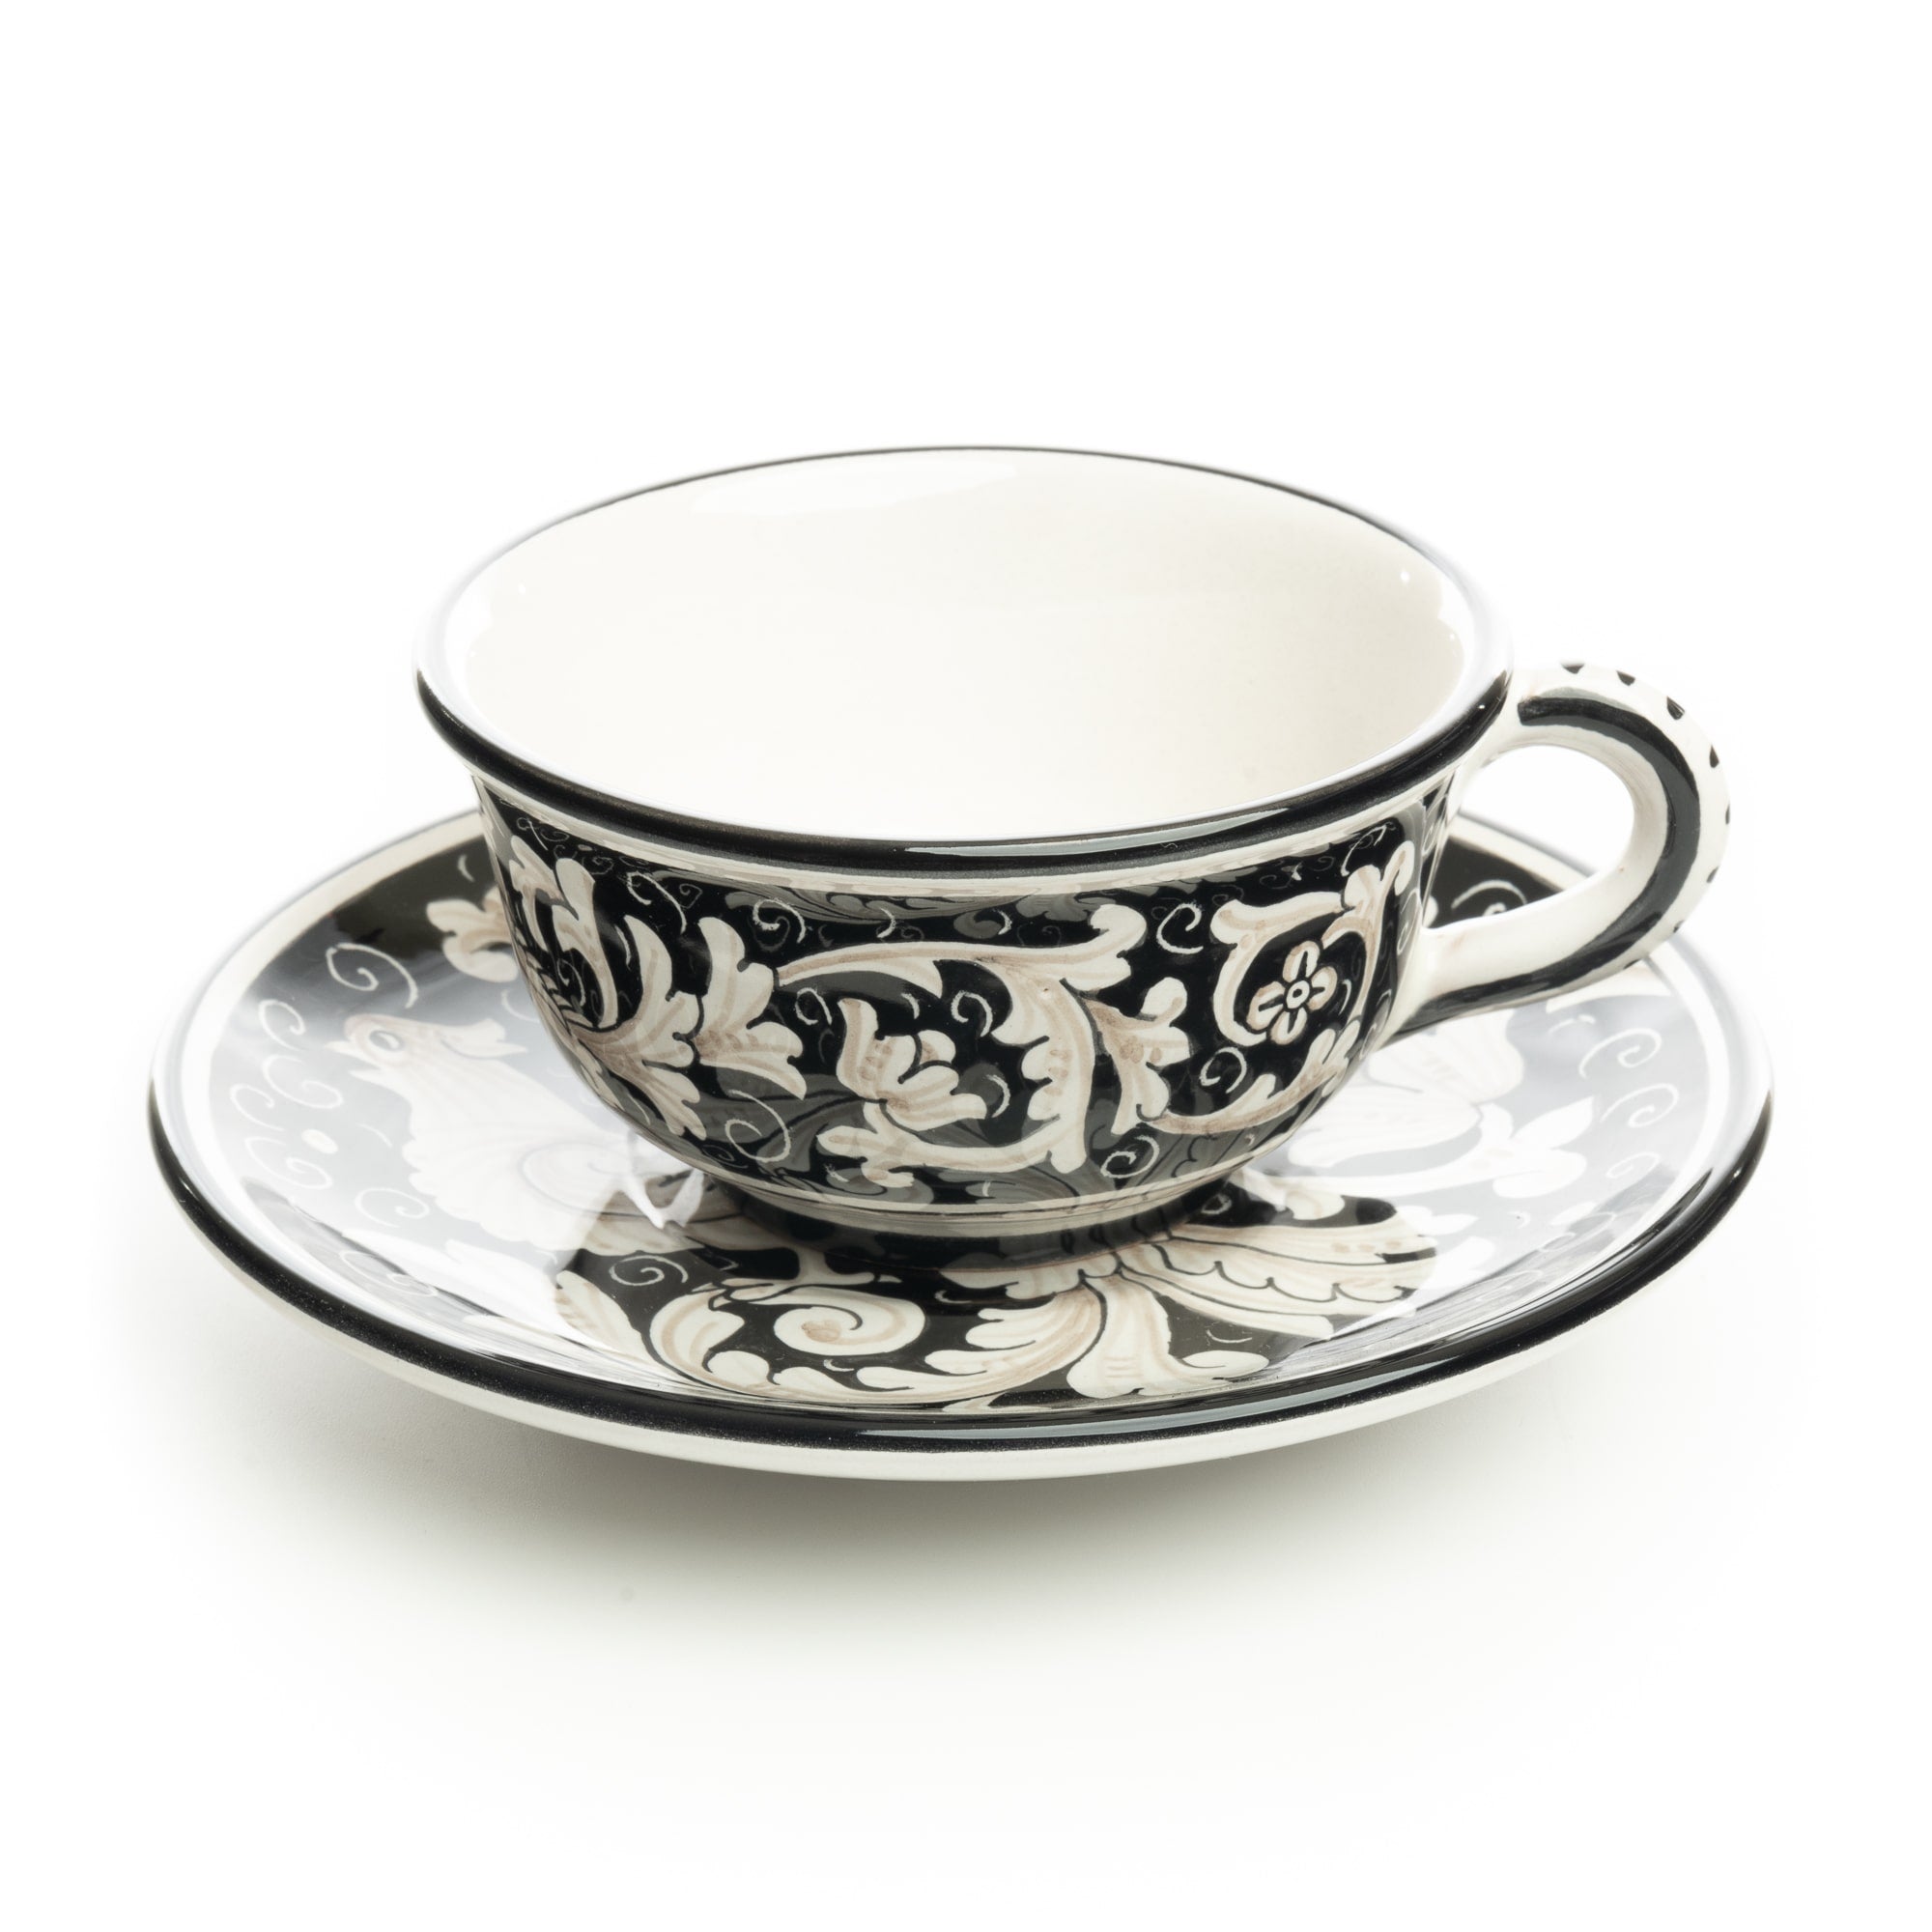 Tuscan Cappuccino Cup & Saucer with Spoon, 8 oz by Arte Italica